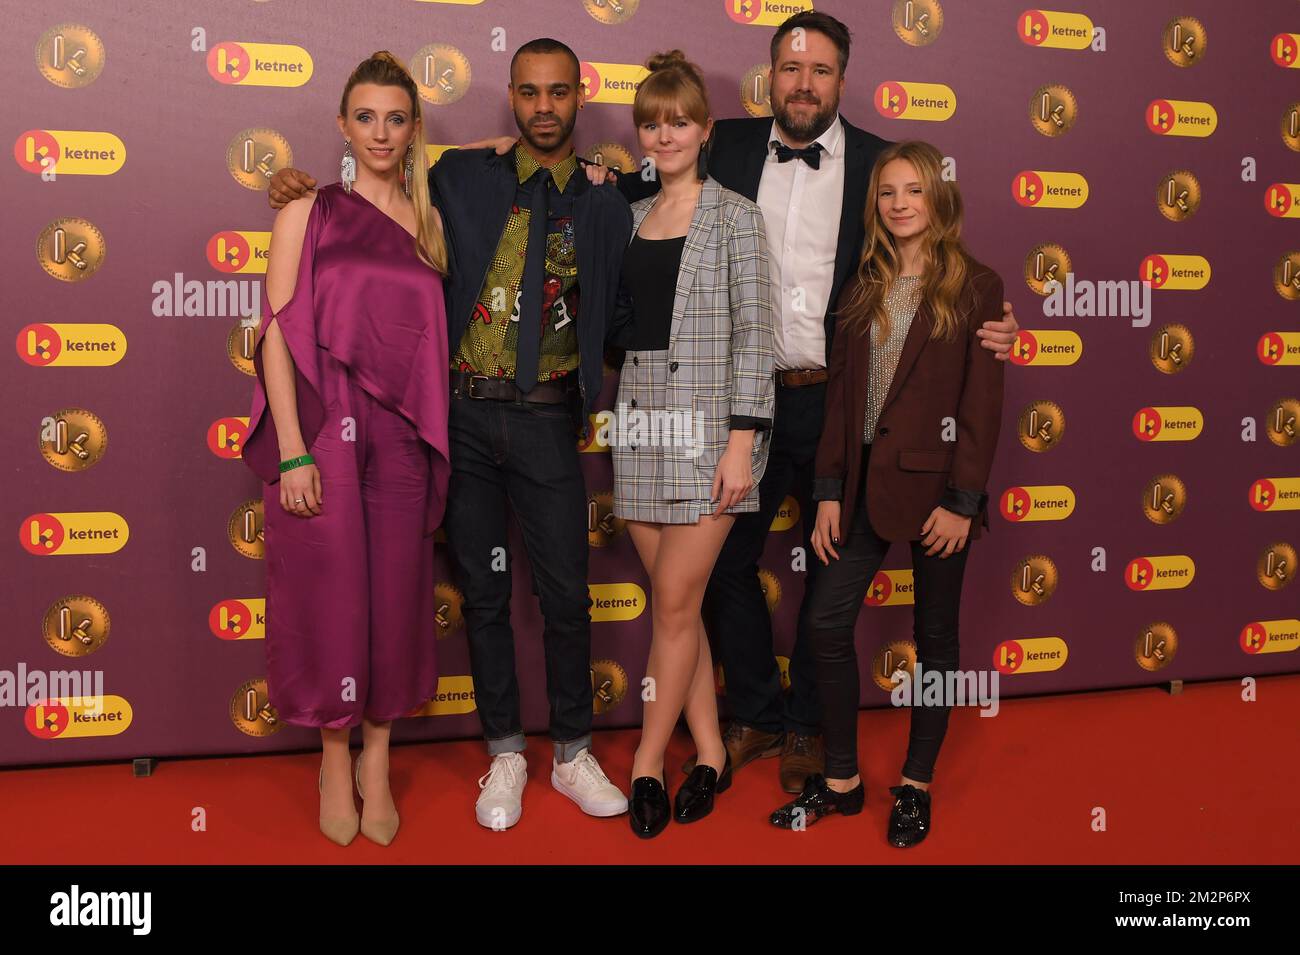 Actors from 'Thuis' including Actress Tine Priem, actor Yemi Oduwale, actor Elise Roels and actor Raf Jansen pictured during the 'Gala van de Gouden K's' award show, organized by Flemish children's television channel Ketnet, Saturday 26 January 2019 in Antwerp. BELGA PHOTO LUC CLAESSEN Stock Photo